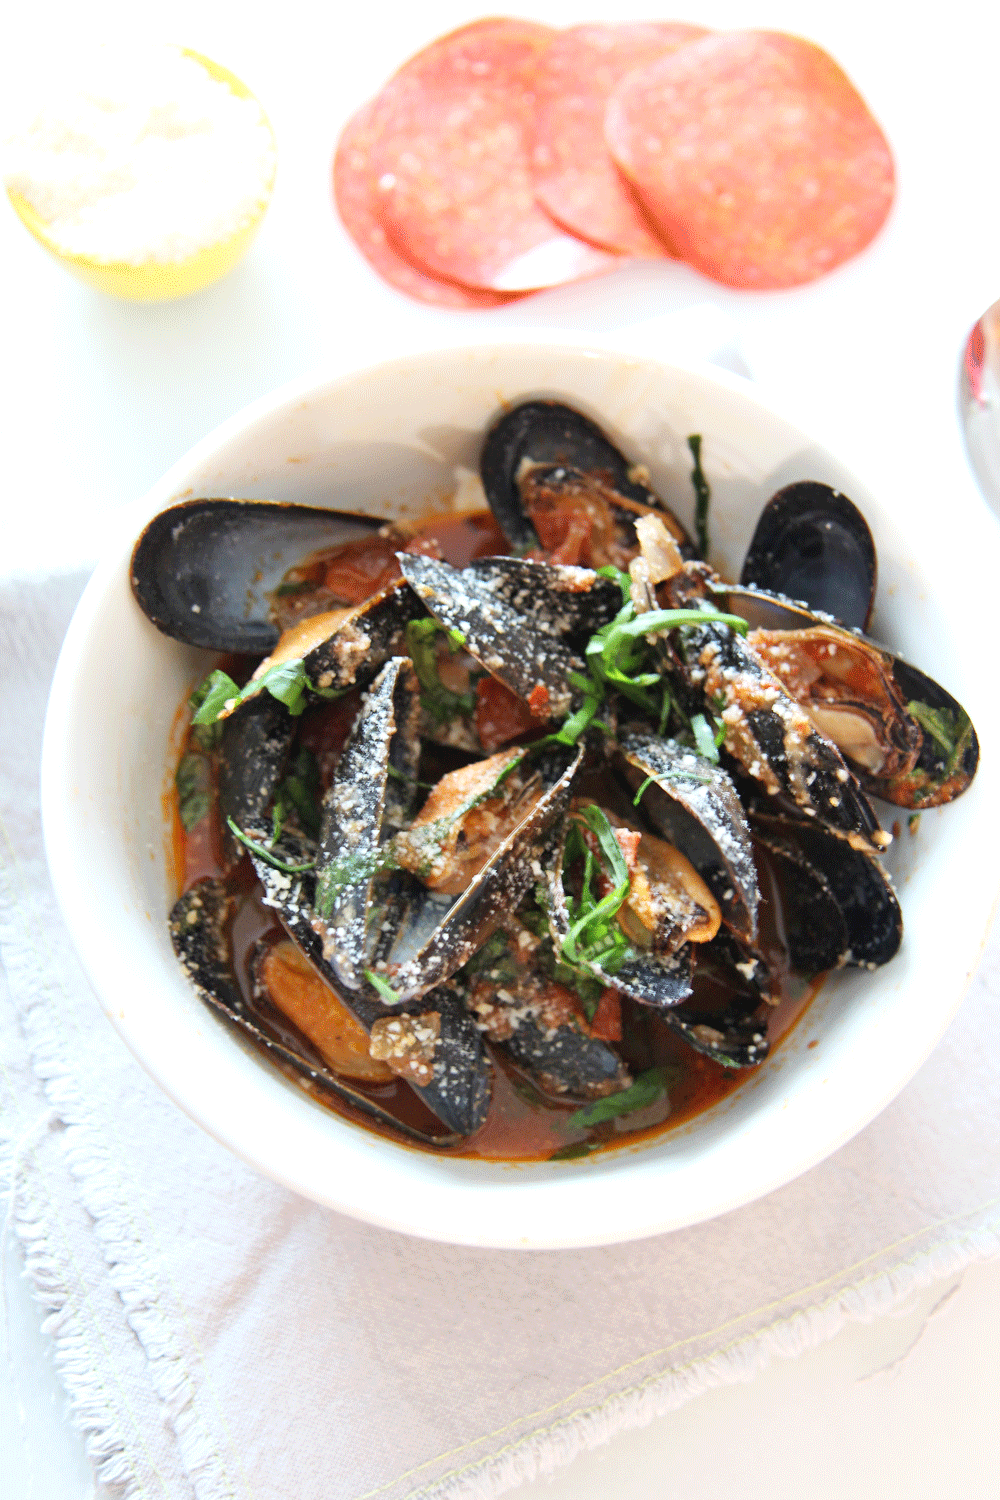 How To Make Pepperoni Pizza Mussels. This is a 15 minutes pizza seafood recipe that is so saucy yum. Grab pepperoni and shallots and sizzle in the pan with mussels, Parm and Italian herbs. Happy Cooking! www.ChopHappy.com #mussels #howtomakeMussles